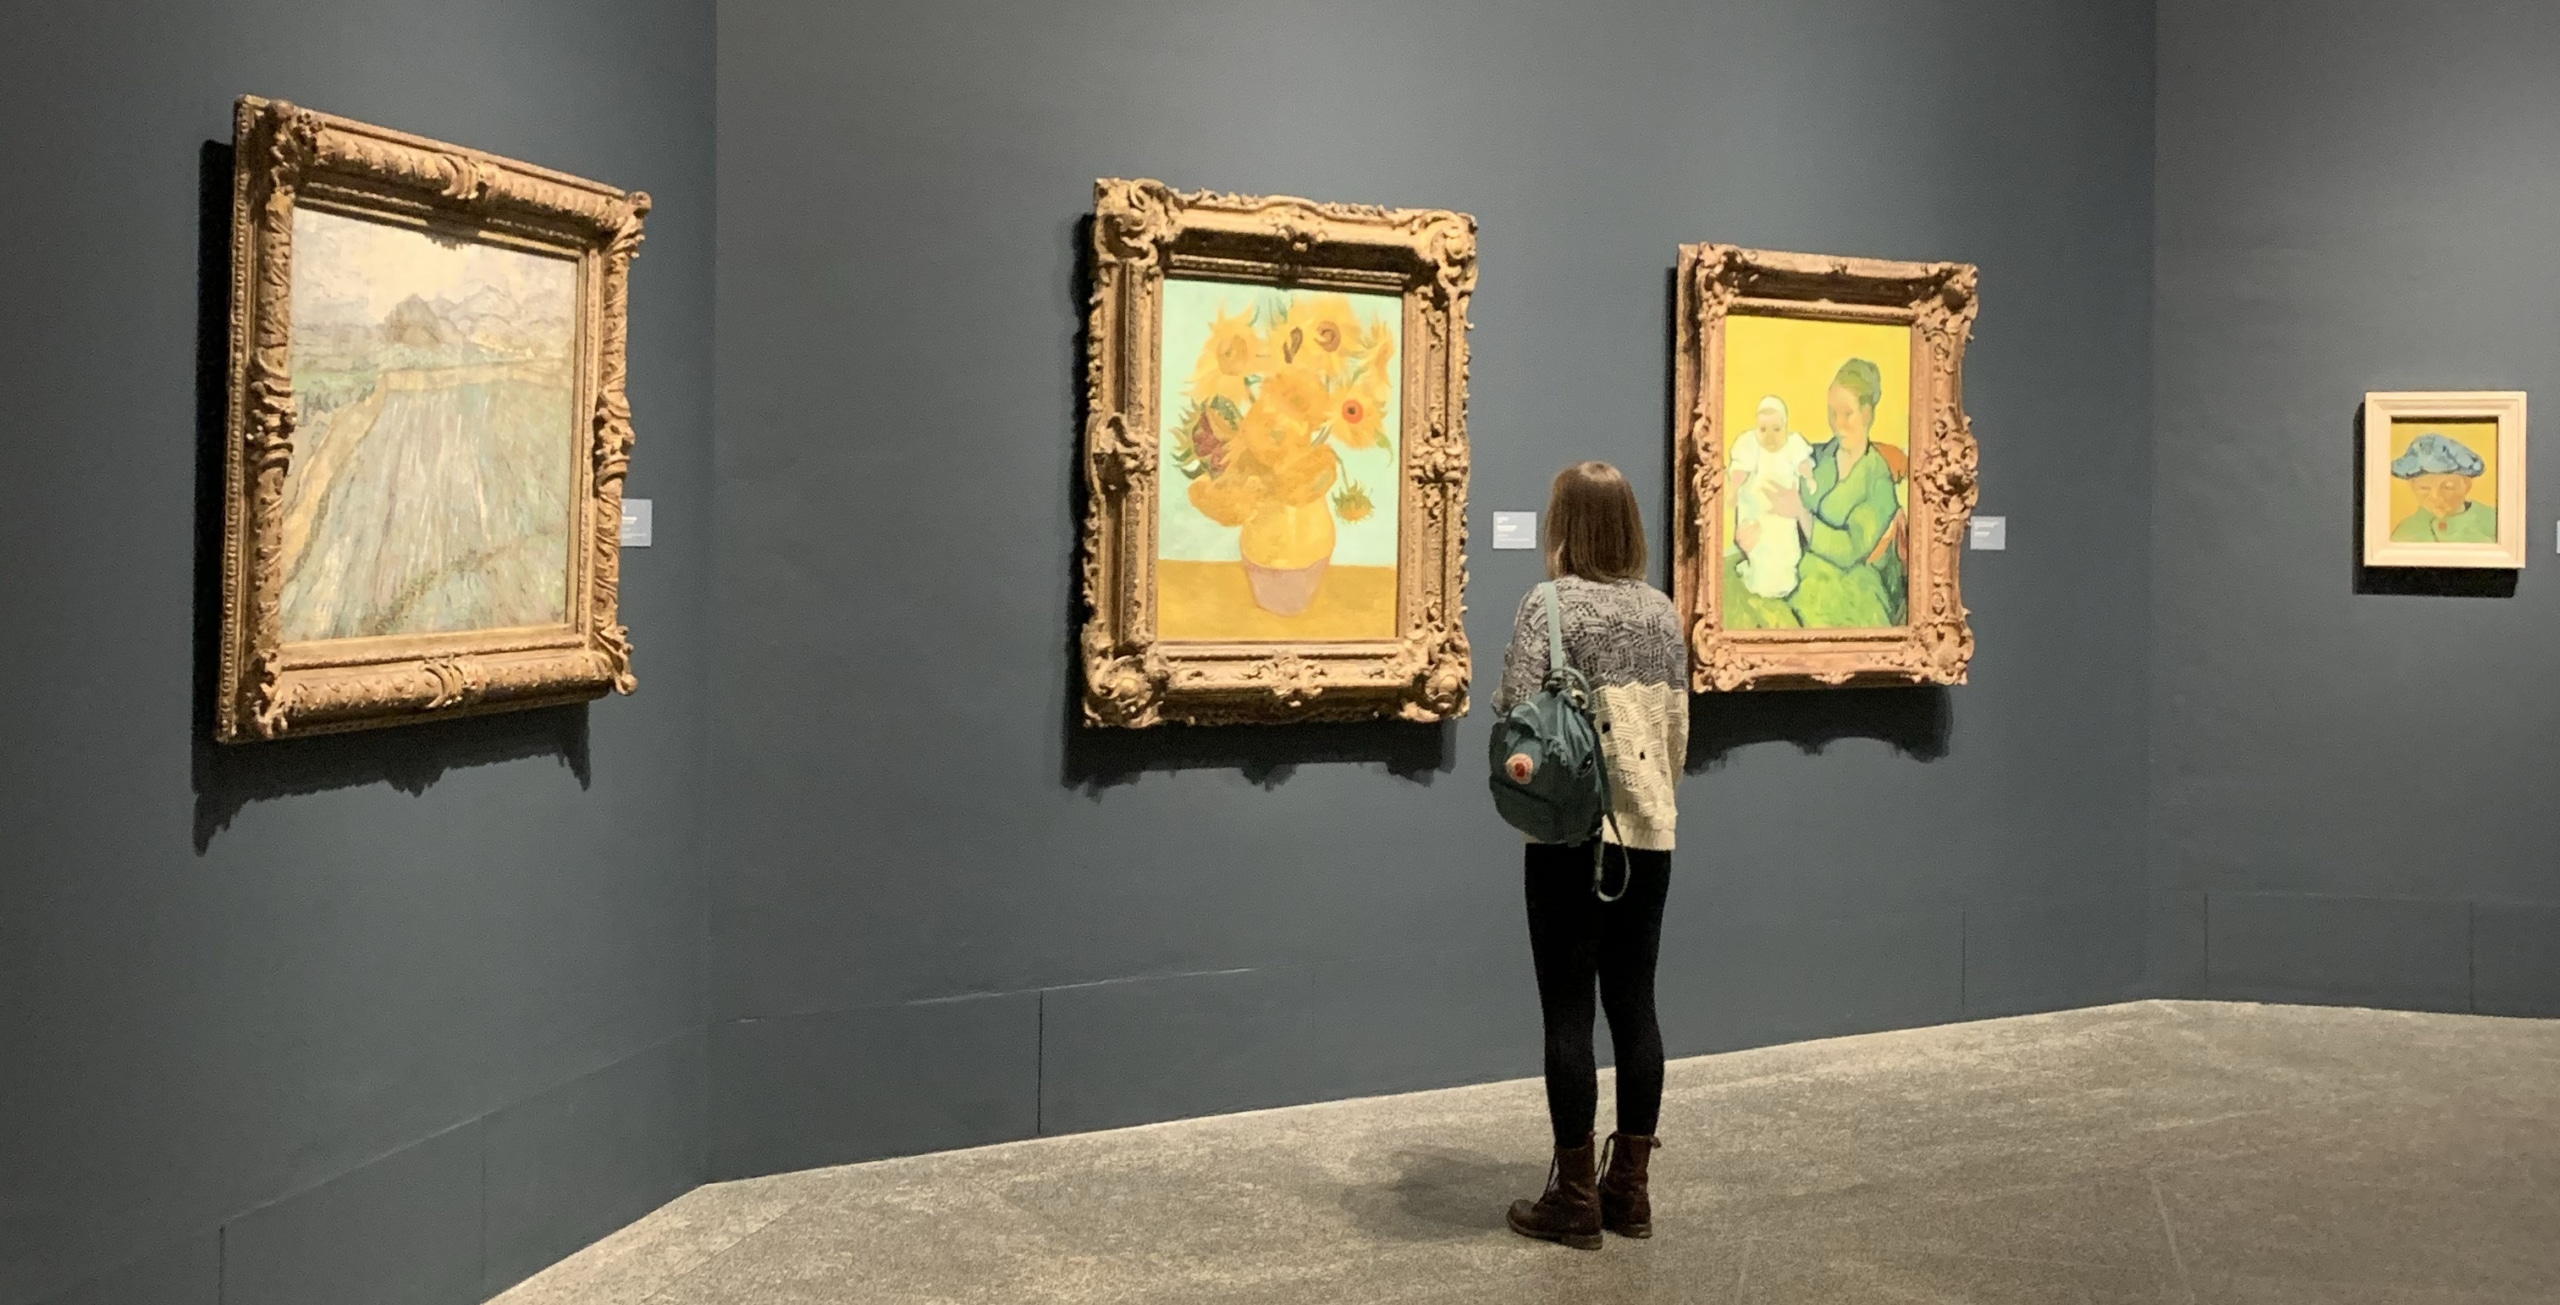 Ellen Orr viewing Van Gogh at the Philadelphia Museum of Art during the Association of Registrars and Collection Specialists conference.